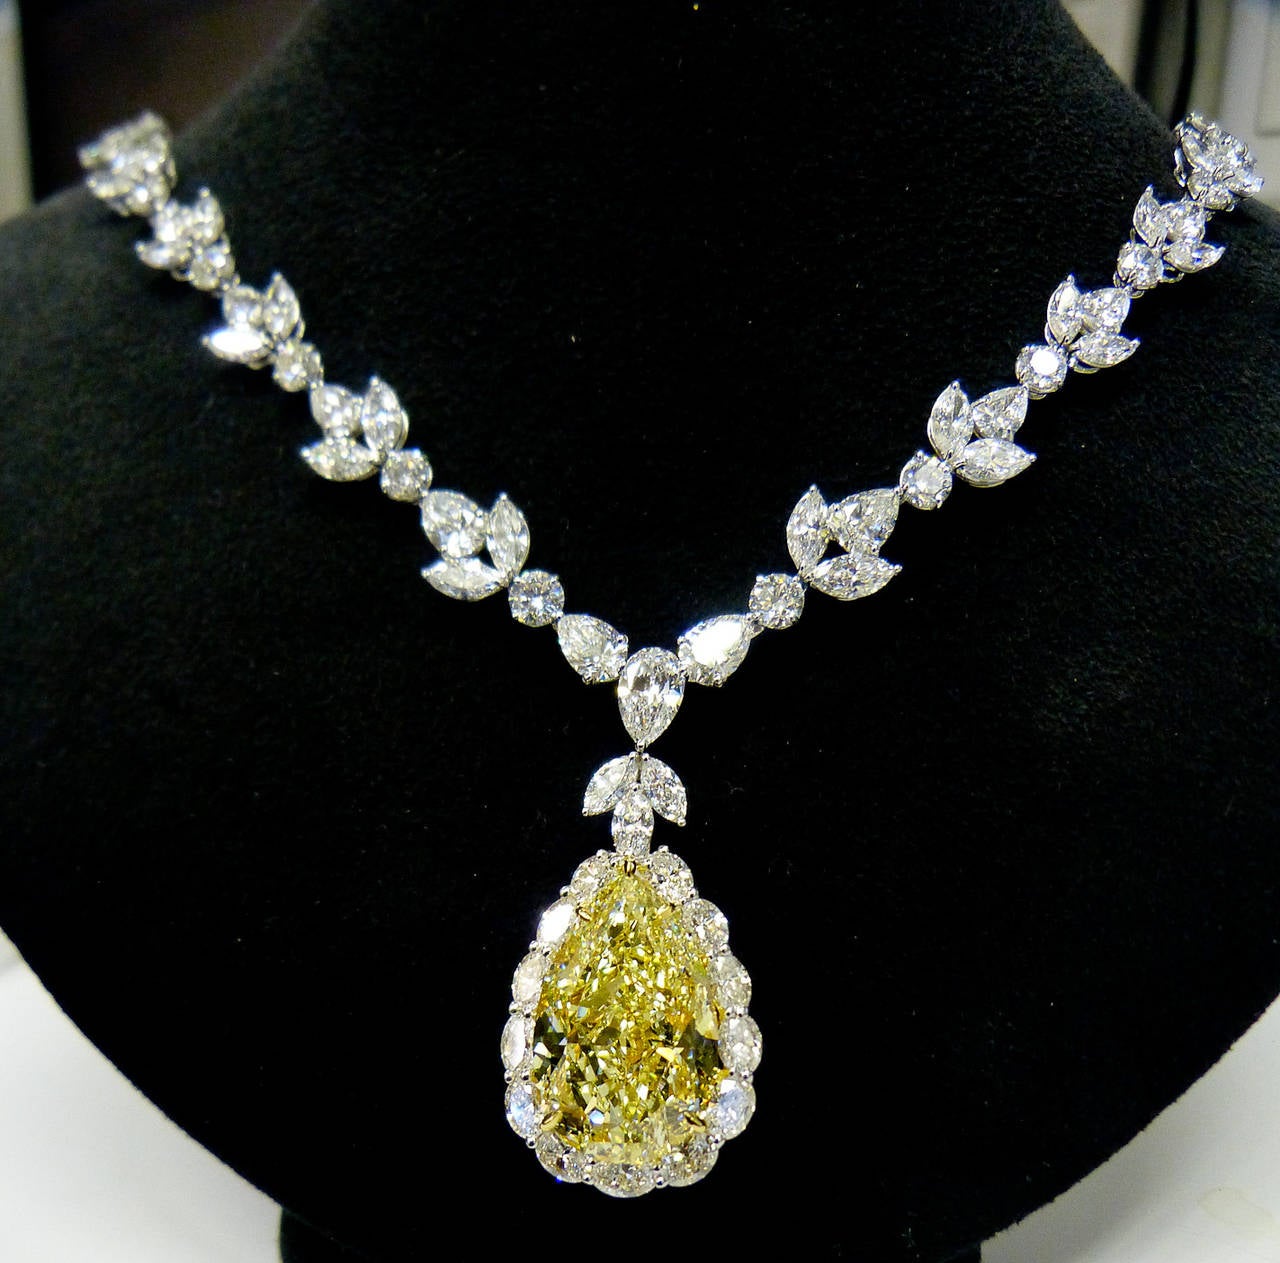 This absolutely stunning custom made necklace was created by Diana M. featuring 35.31 Carat Fancy Intense Yellow Pear Shape, one of the highest color grading, VS2 in Clarity. Surrounded by 47.00 carats of multi-shape diamonds, all D/E/F VVS/VS color